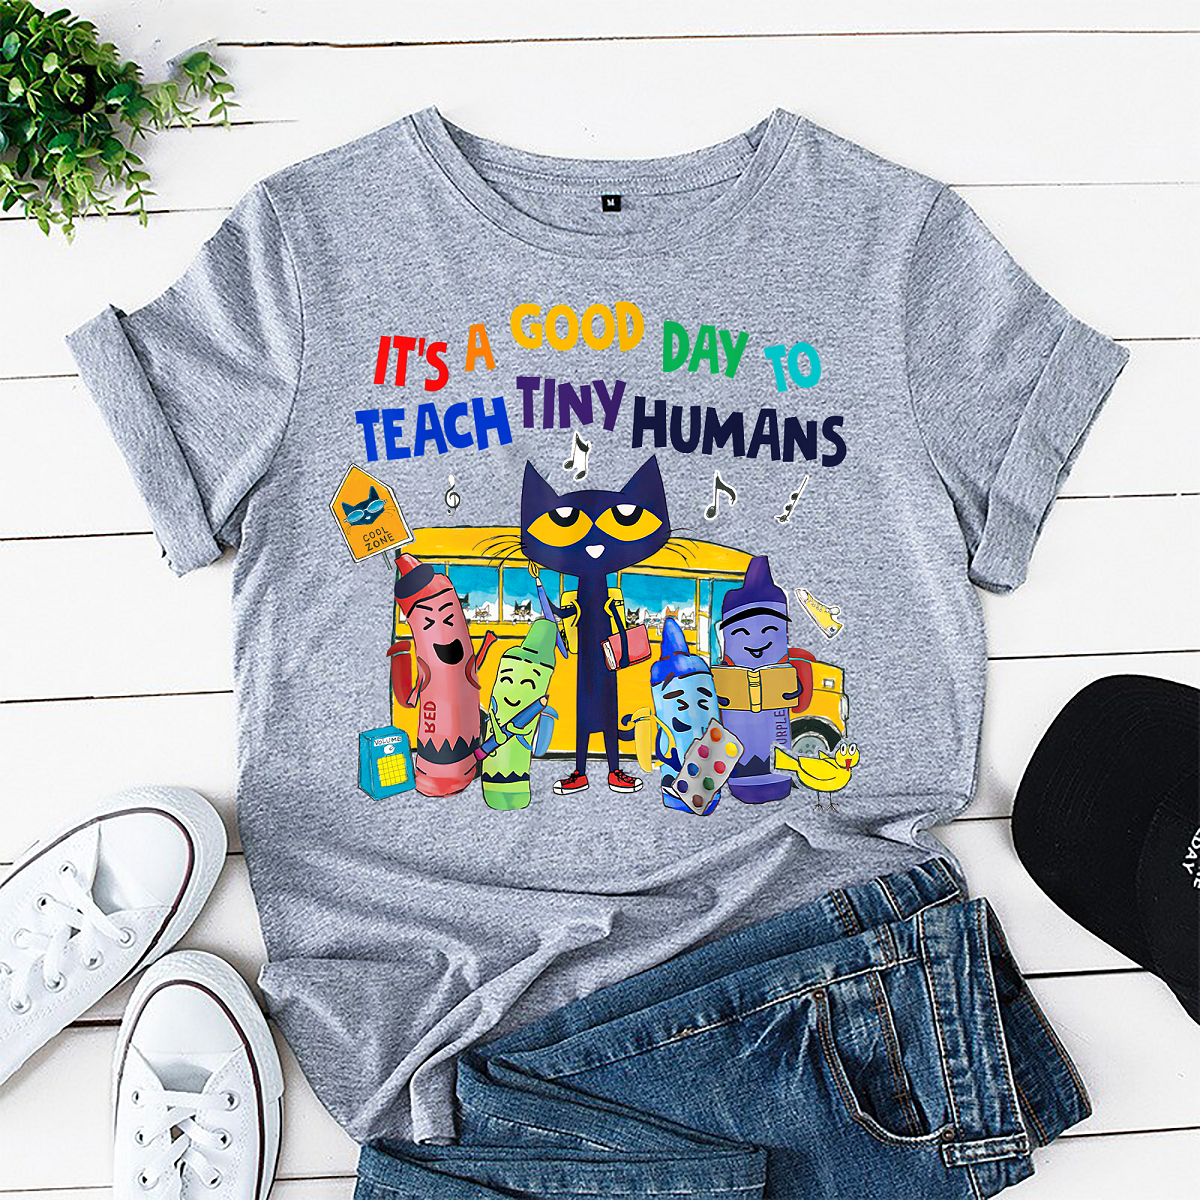 Pete The Cat Its A Good Day To Teach A Tiny Women shirt, All Good In Kindergarten Unisex T-shirt, Back to School Tee, 1st day of school tee